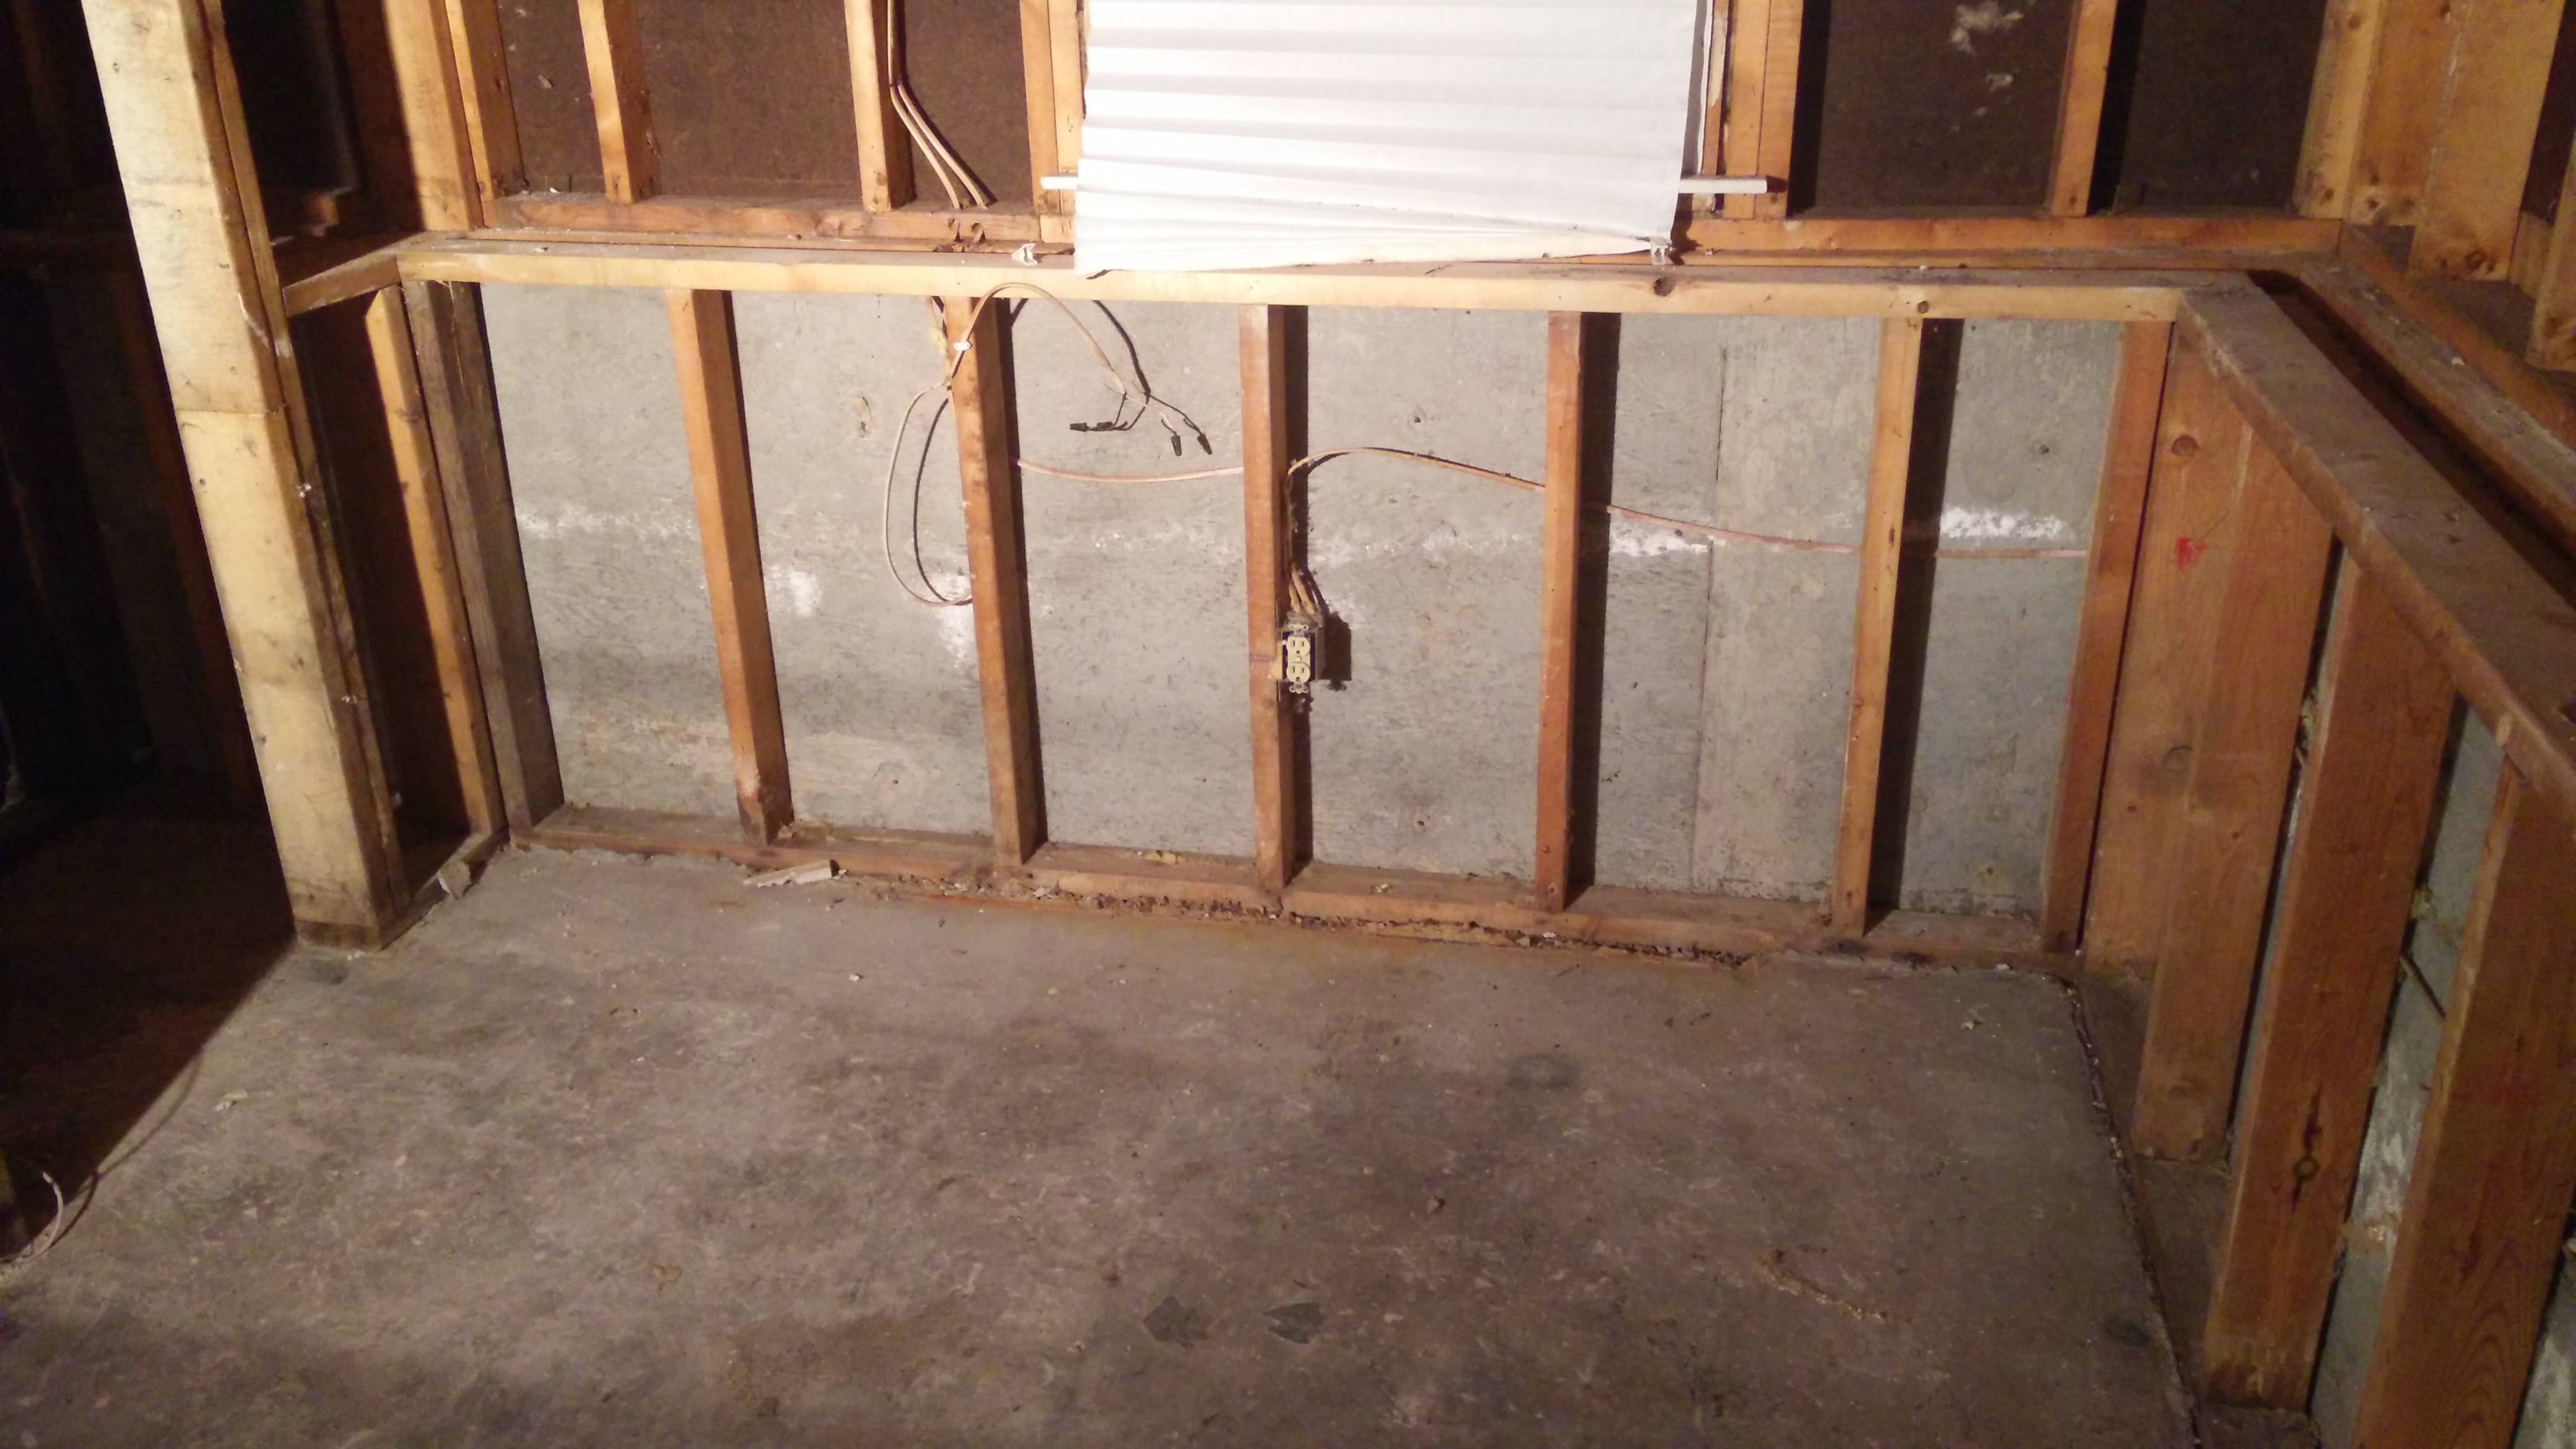 Re-framing basement walls after flooding. Drain tile with no ...